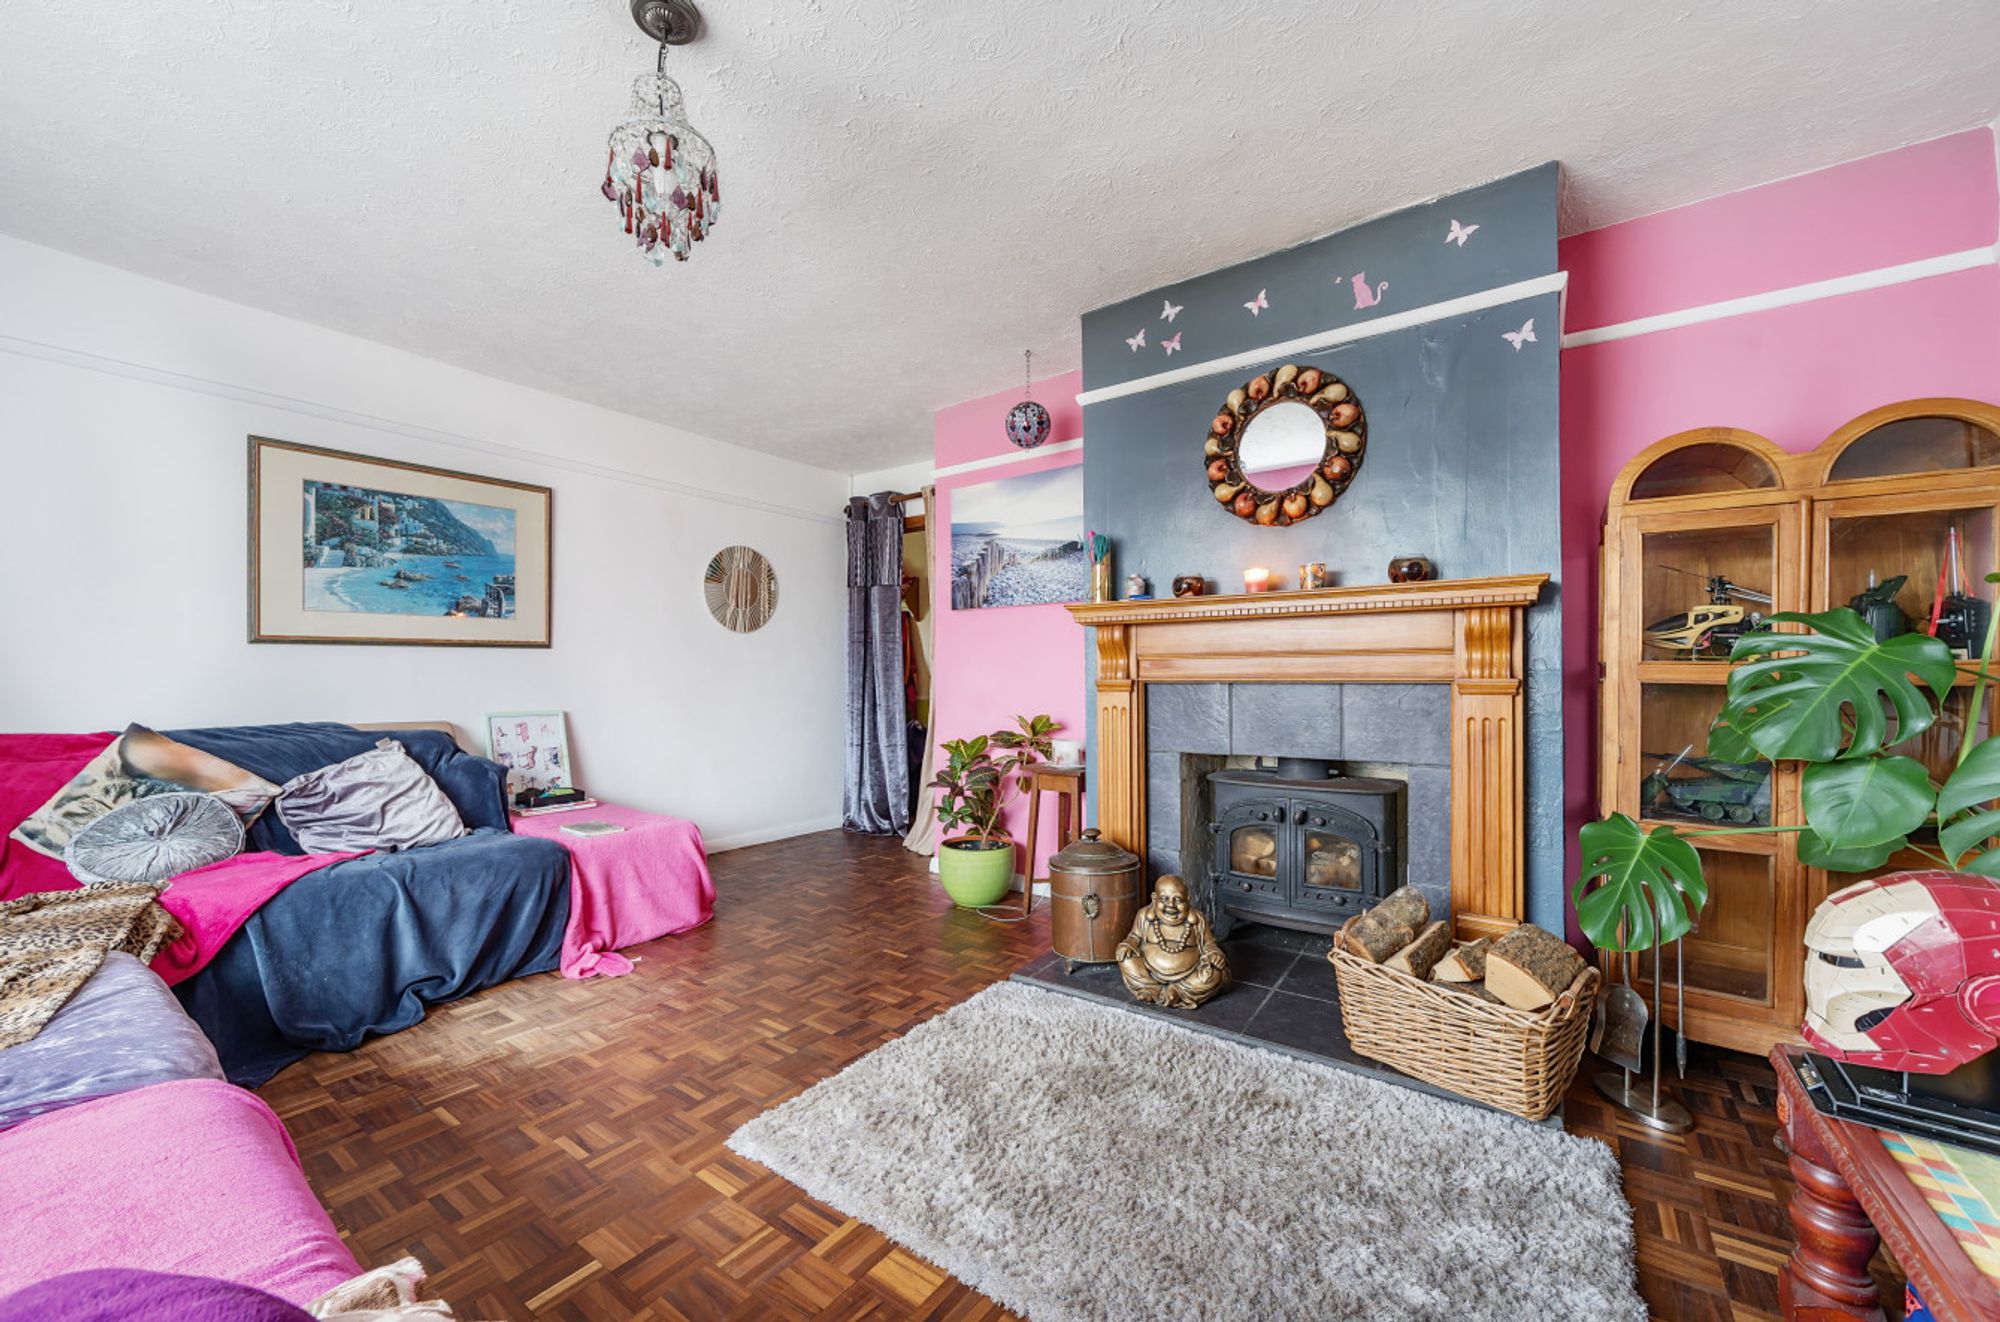 Gainsborough Drive, Selsey, PO20